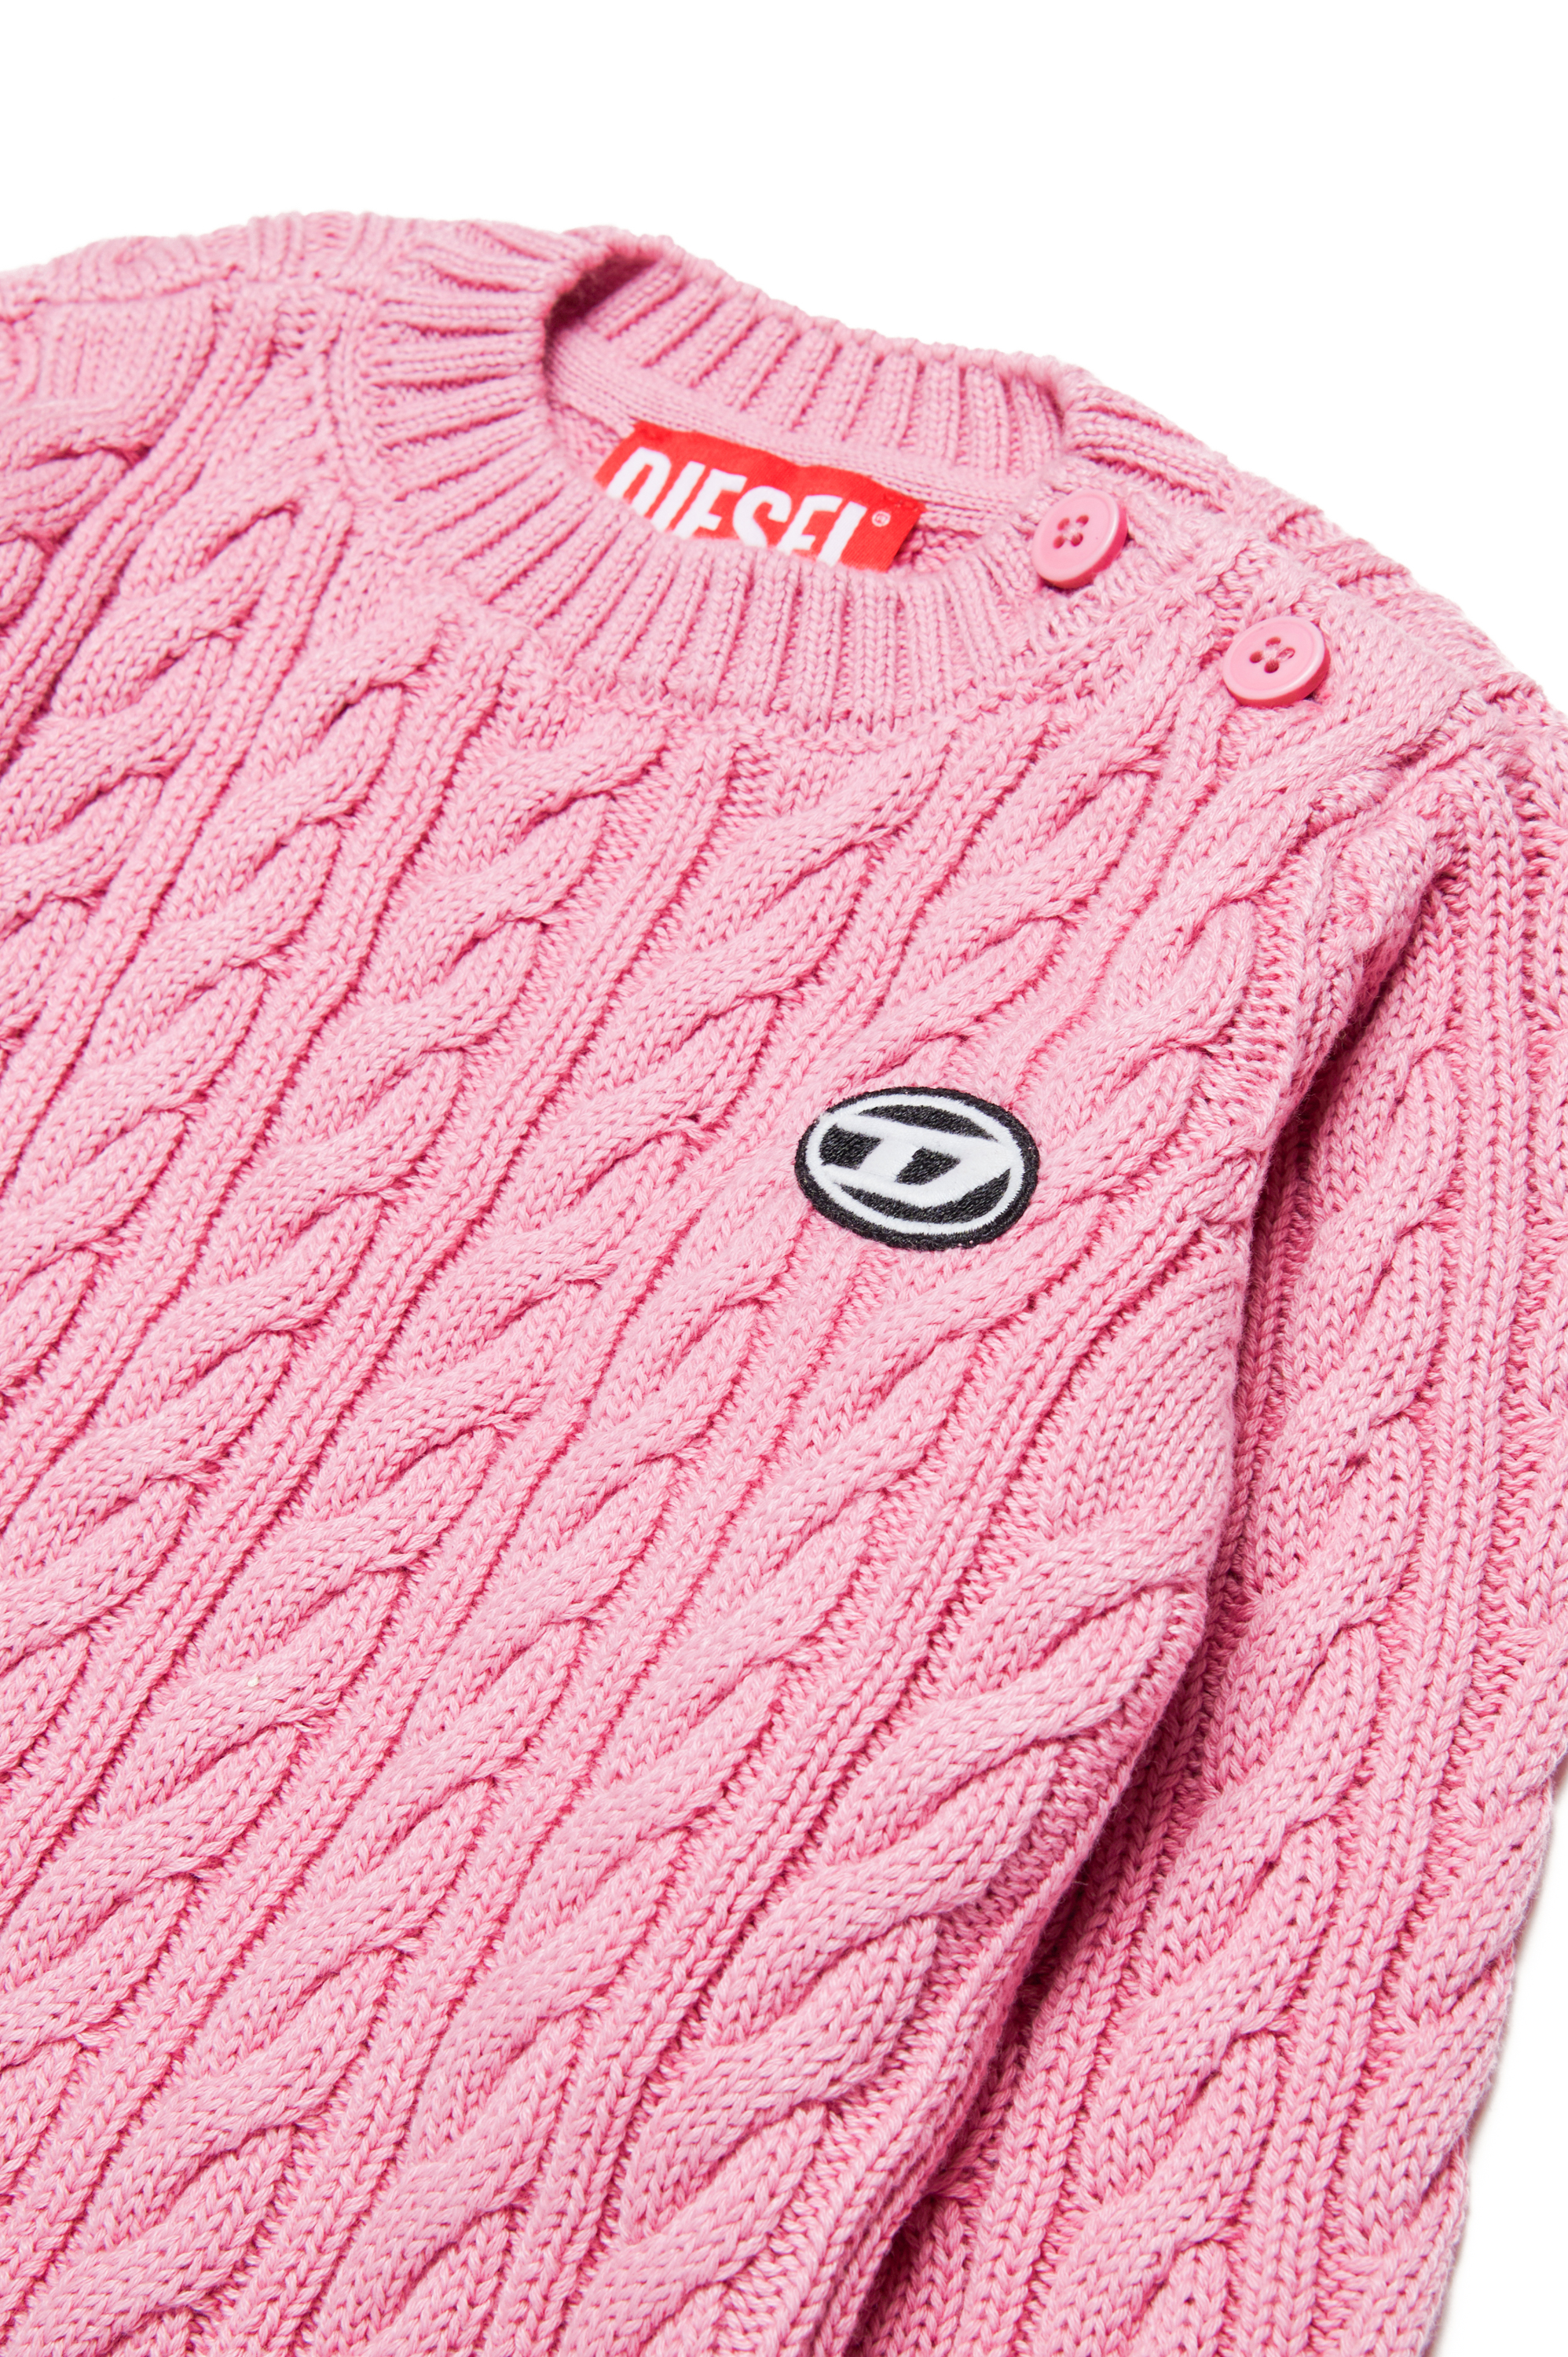 Diesel - KBAMBYB, Unisex Pullover in cotone con patch Oval D in Rosa - Image 3